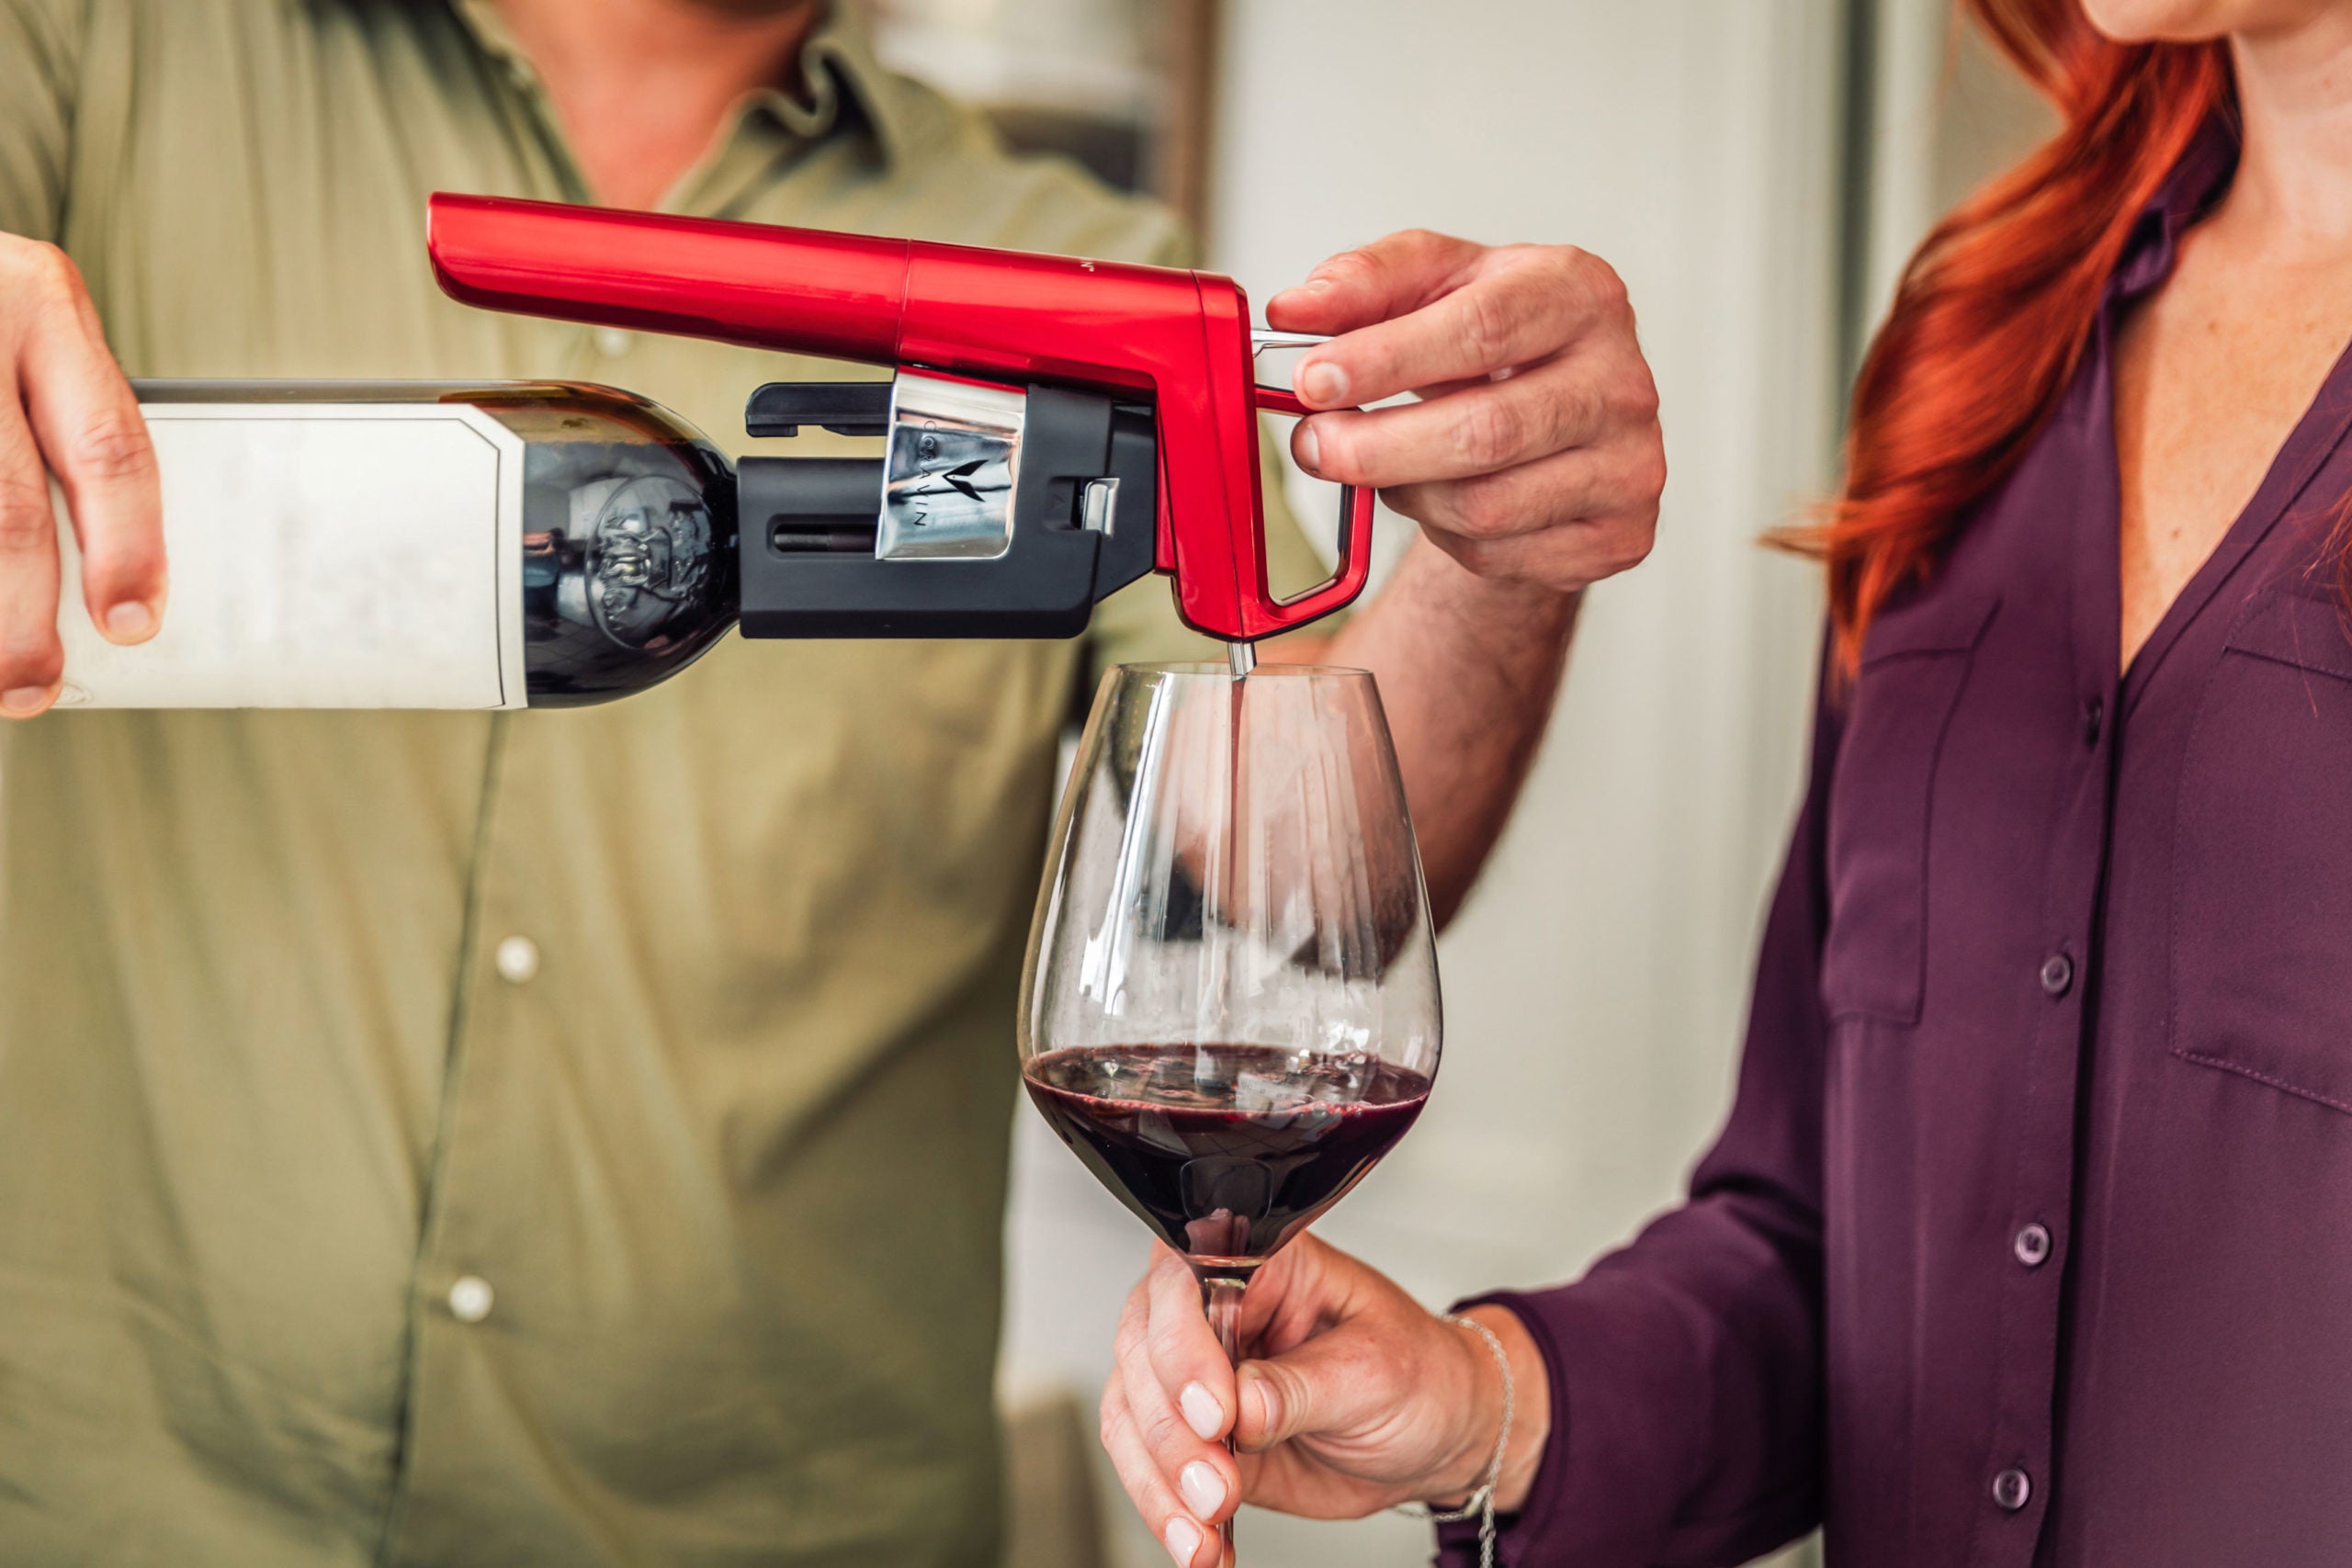 Greg Lambrecht, Founder of Coravin, on Fixing Wine's Biggest Problem